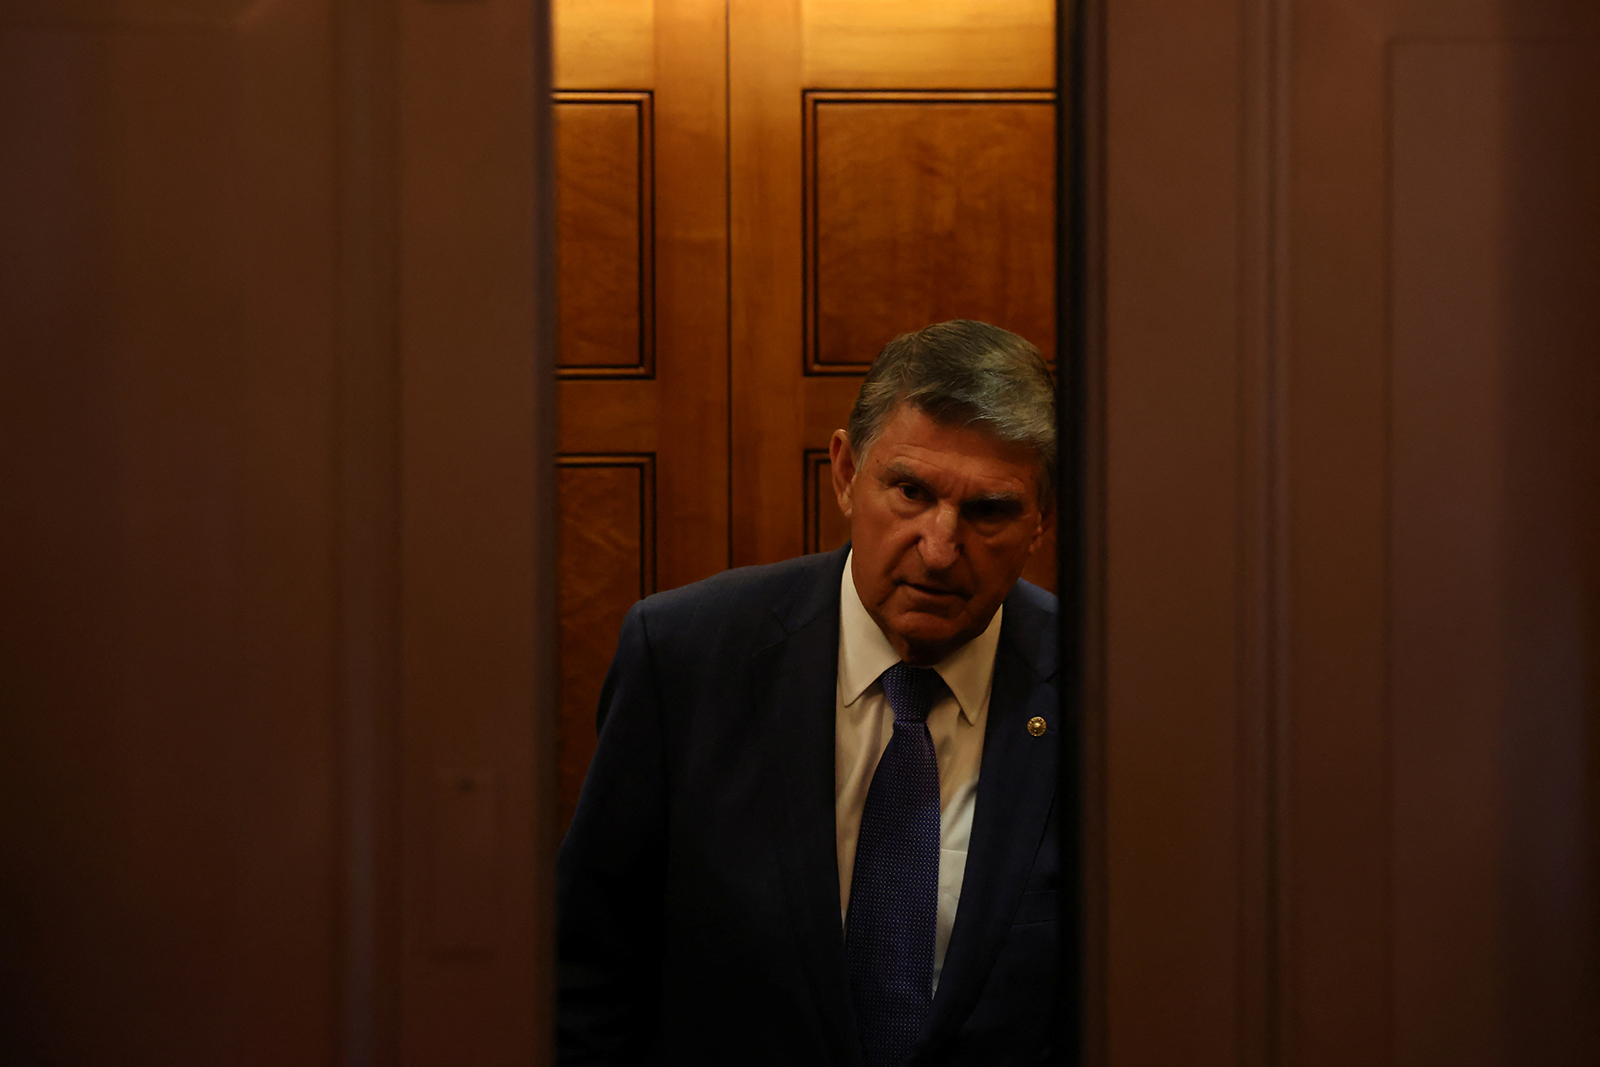 U.S. Senator Joe Manchin (D-WV) rides an elevator after leaving the Senate floor amid ongoing talks over government funding, as the threat of an October government shutdown looms on Capitol Hill, in Washington, on September 6.